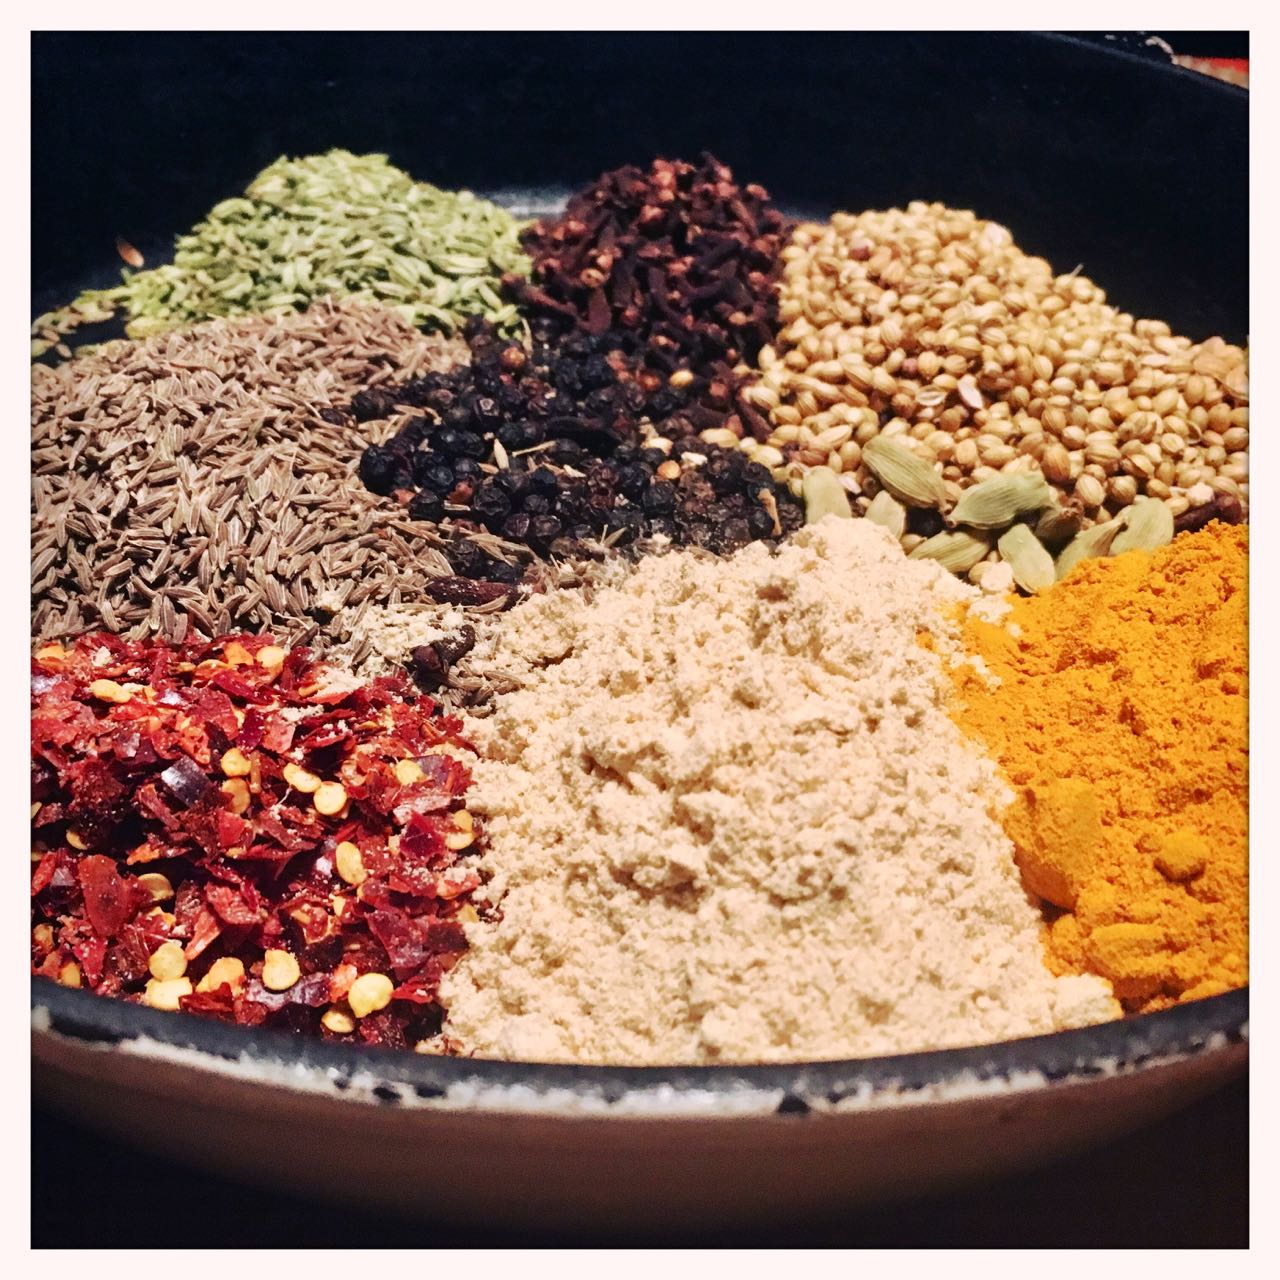 Preparing a Thai spice mix ready for some recipes